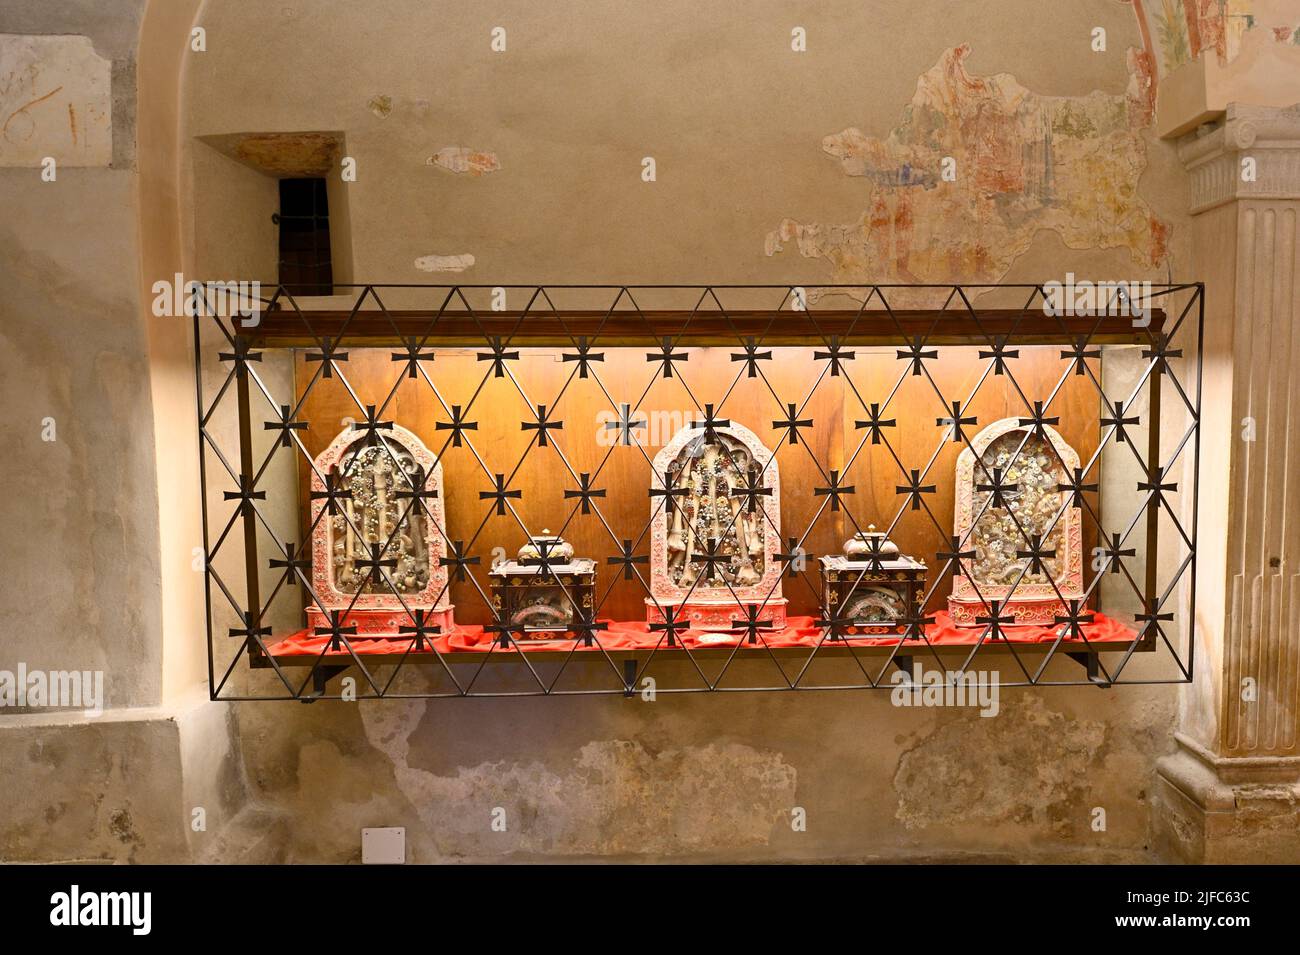 Aquileia, Italy. 19 June 2022. Interior view of the Basilica of Aquileia. Relics of the martyrs of Aquileia, Hermagoras and Fortunatus in the crypt Stock Photo